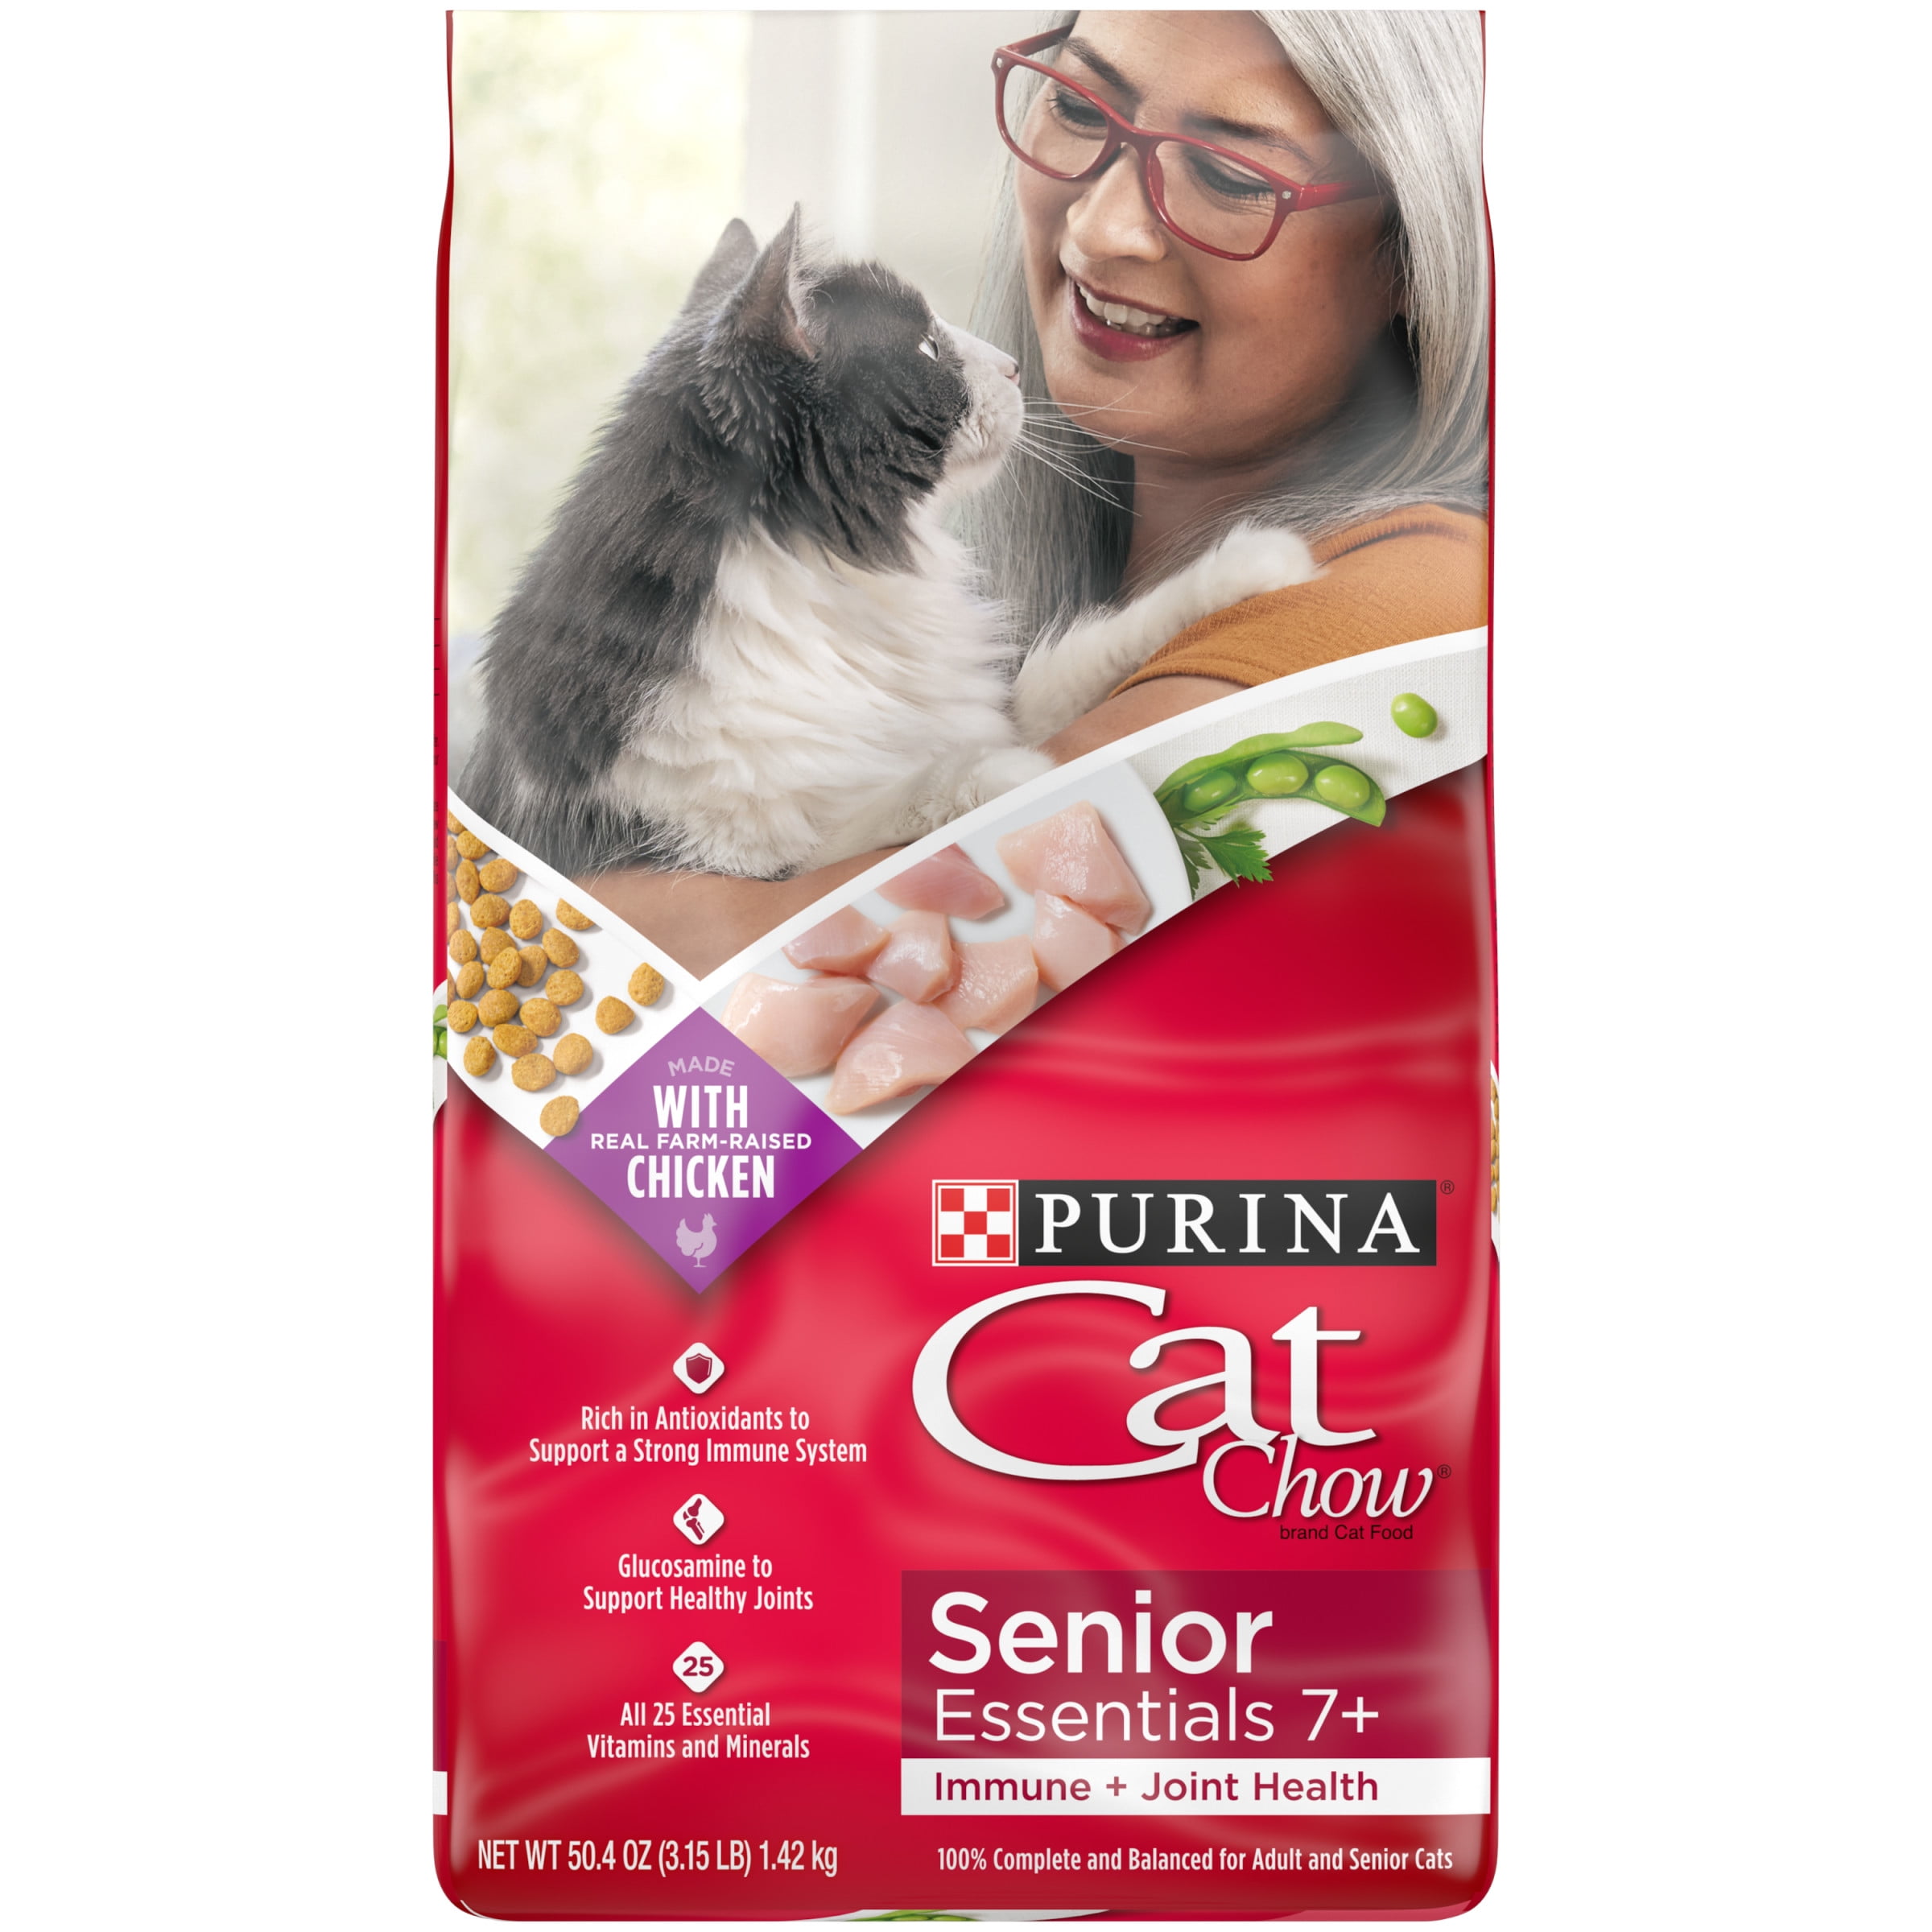 Purina Cat Chow Chicken Flavor Dry Cat Food for Senior Cats, 3.15 lb Bag